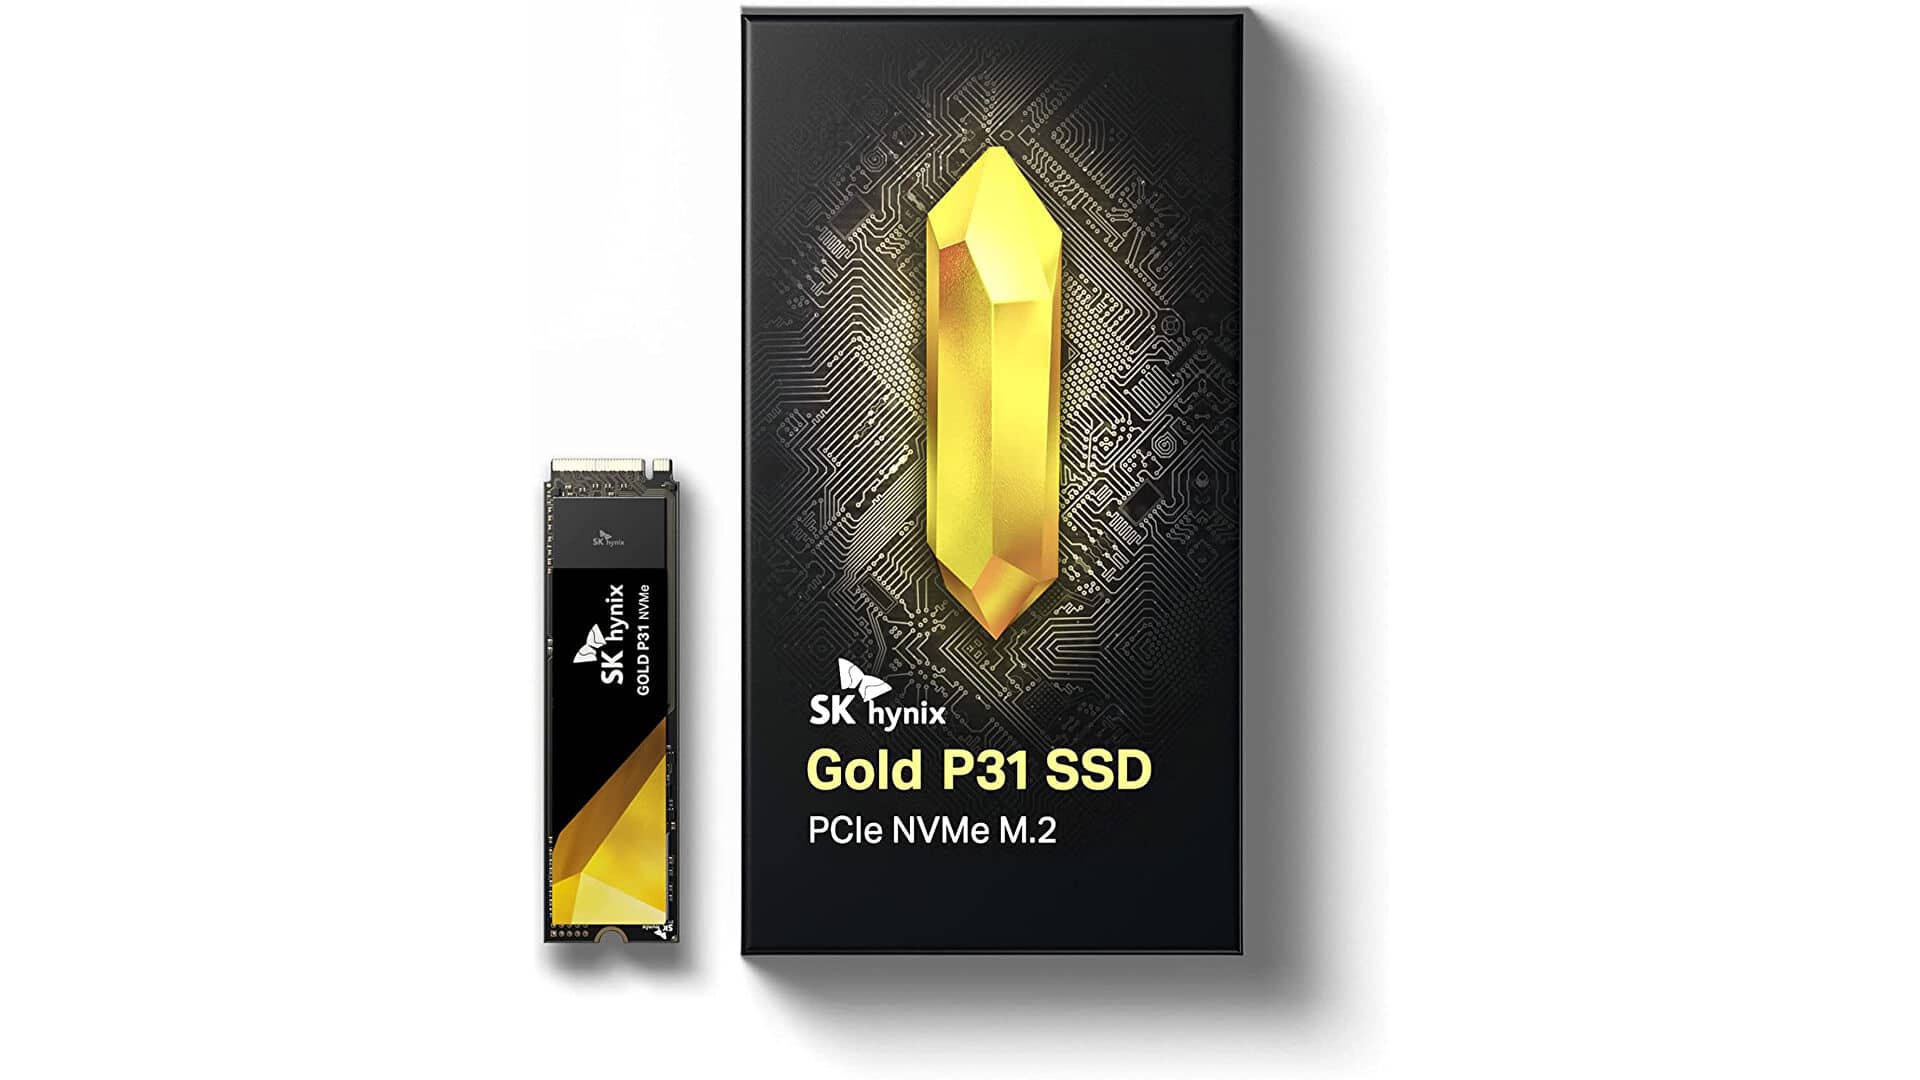 This rapid SK Hynix Gold 1TB NVMe SSD is $92.58 - a historic low price